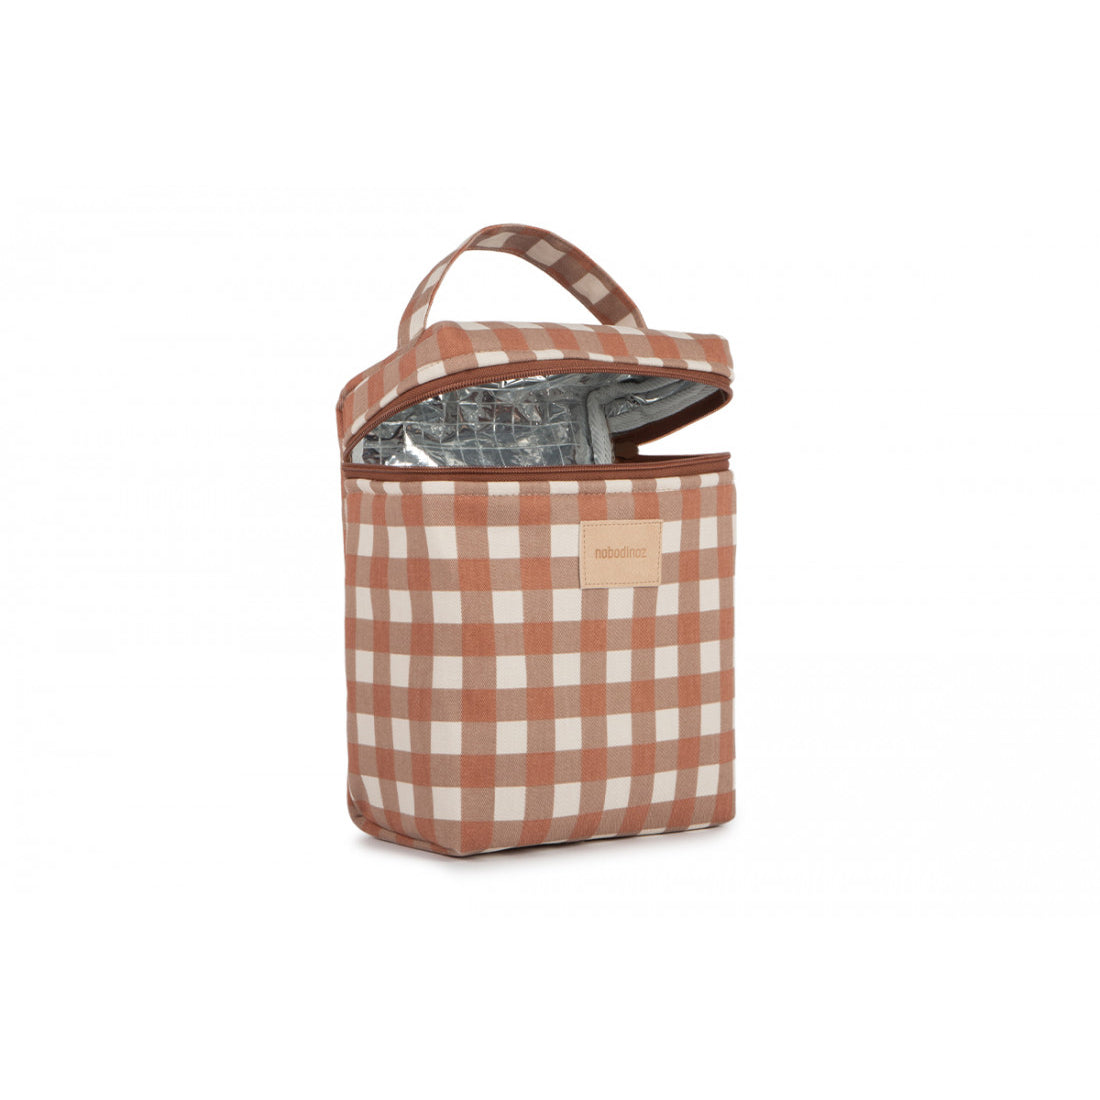 nobodinoz-hyde-park-insulated-baby-bottle-and-lunch-bag-terracotta-checks-nobo-4926937